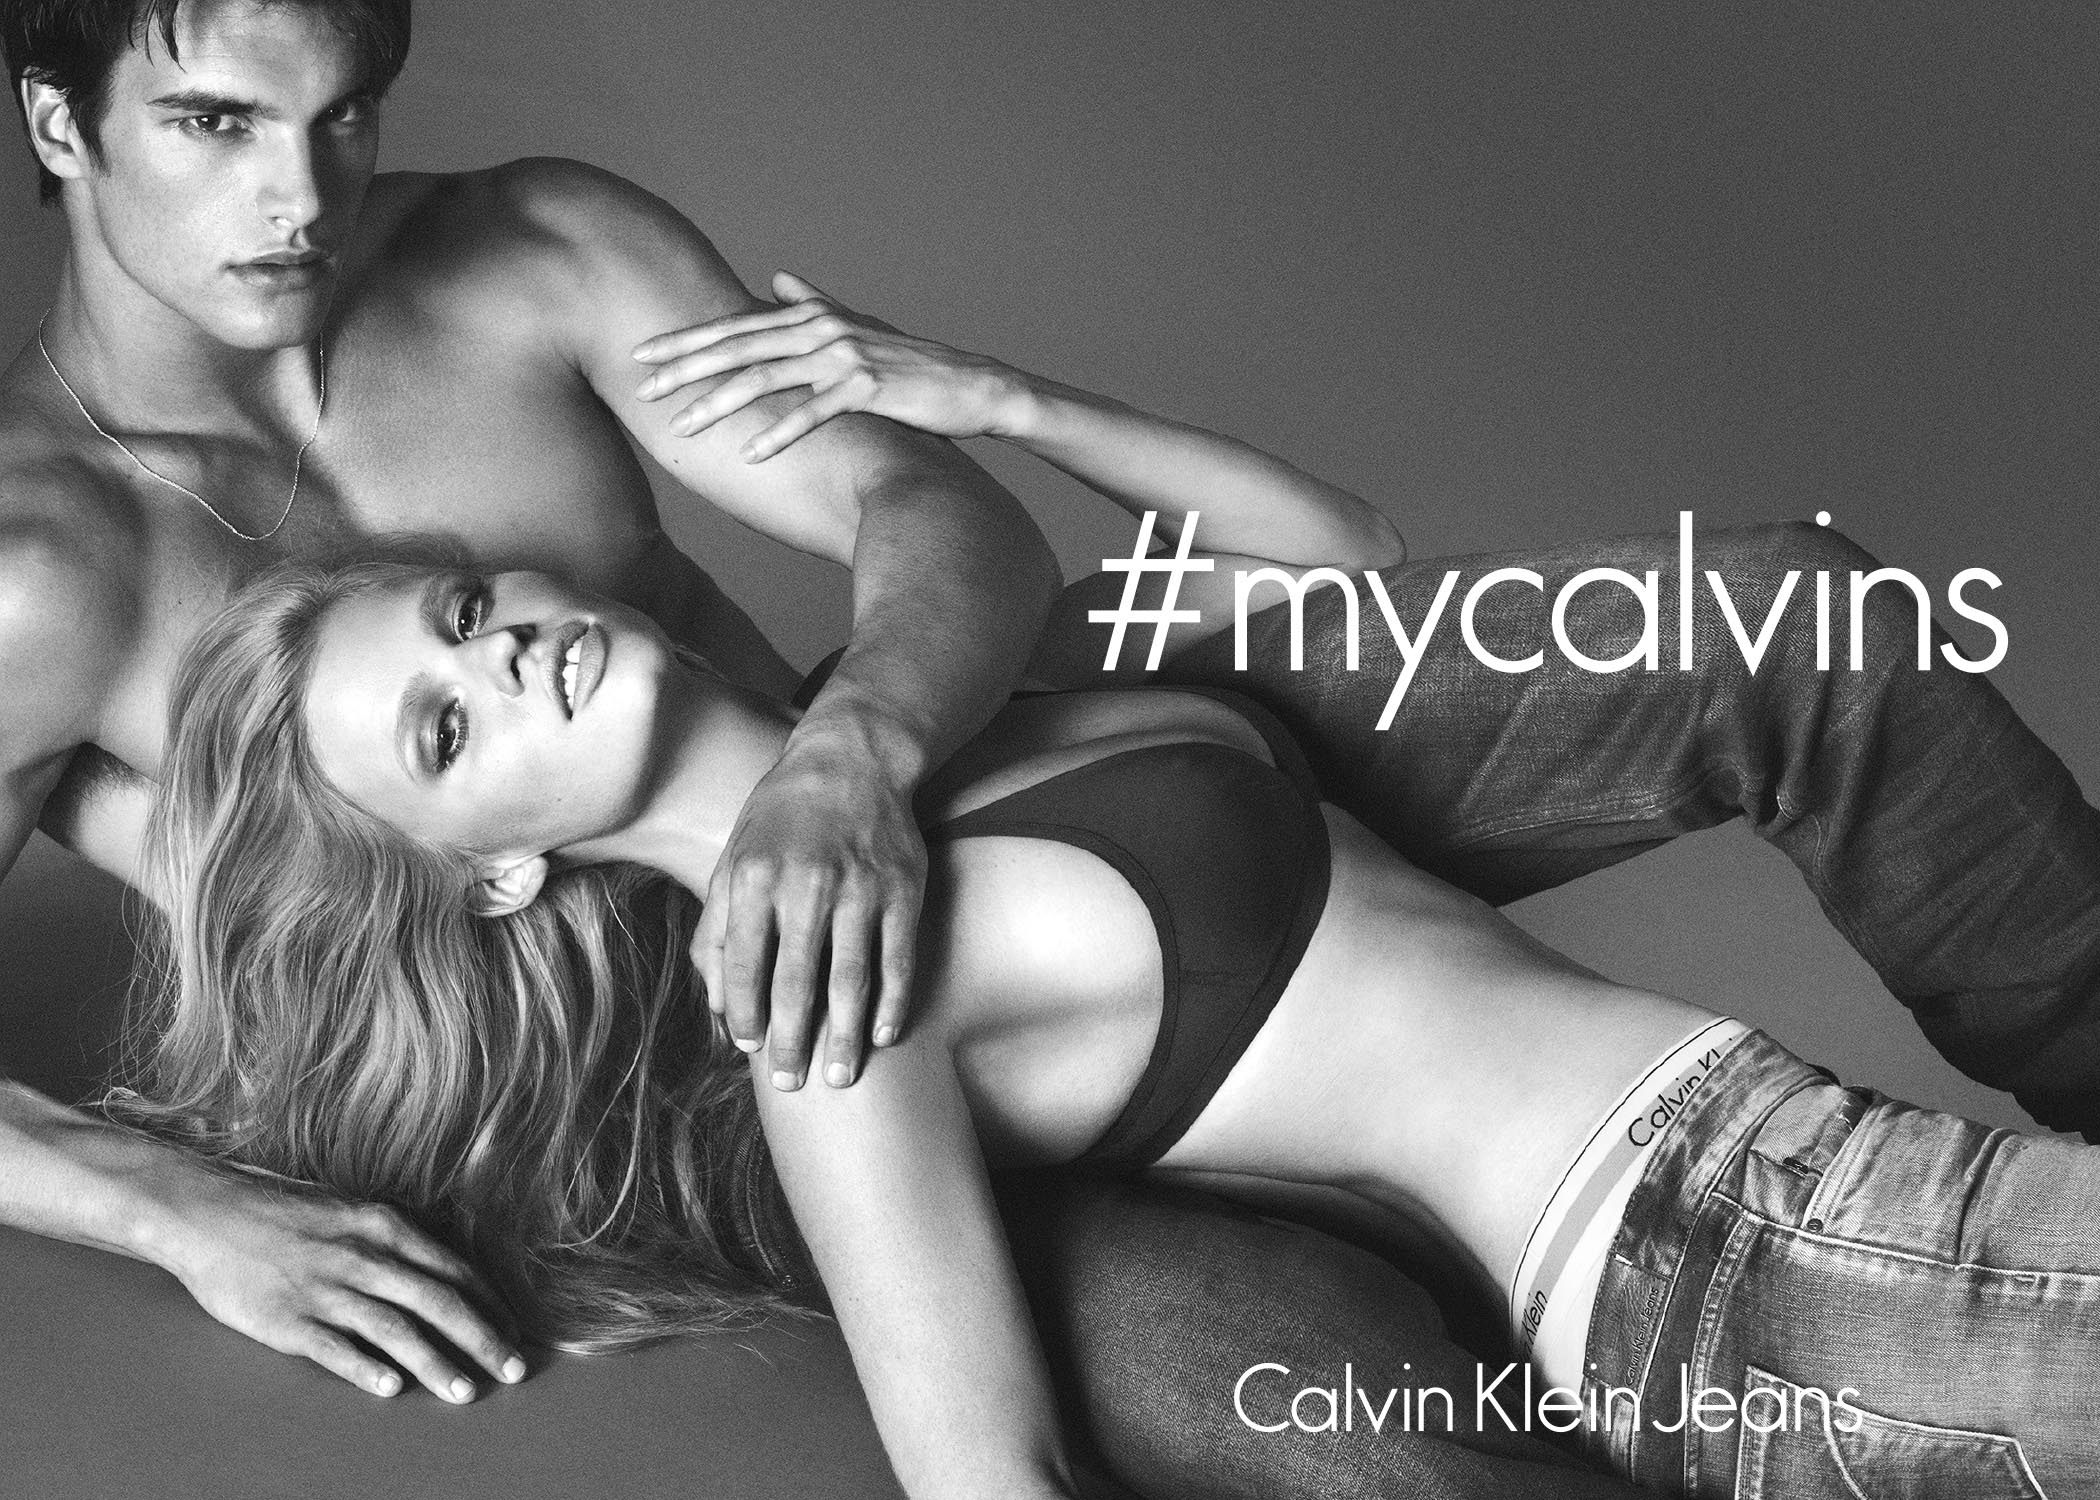 The News From Calvin Klein Keeps On Coming